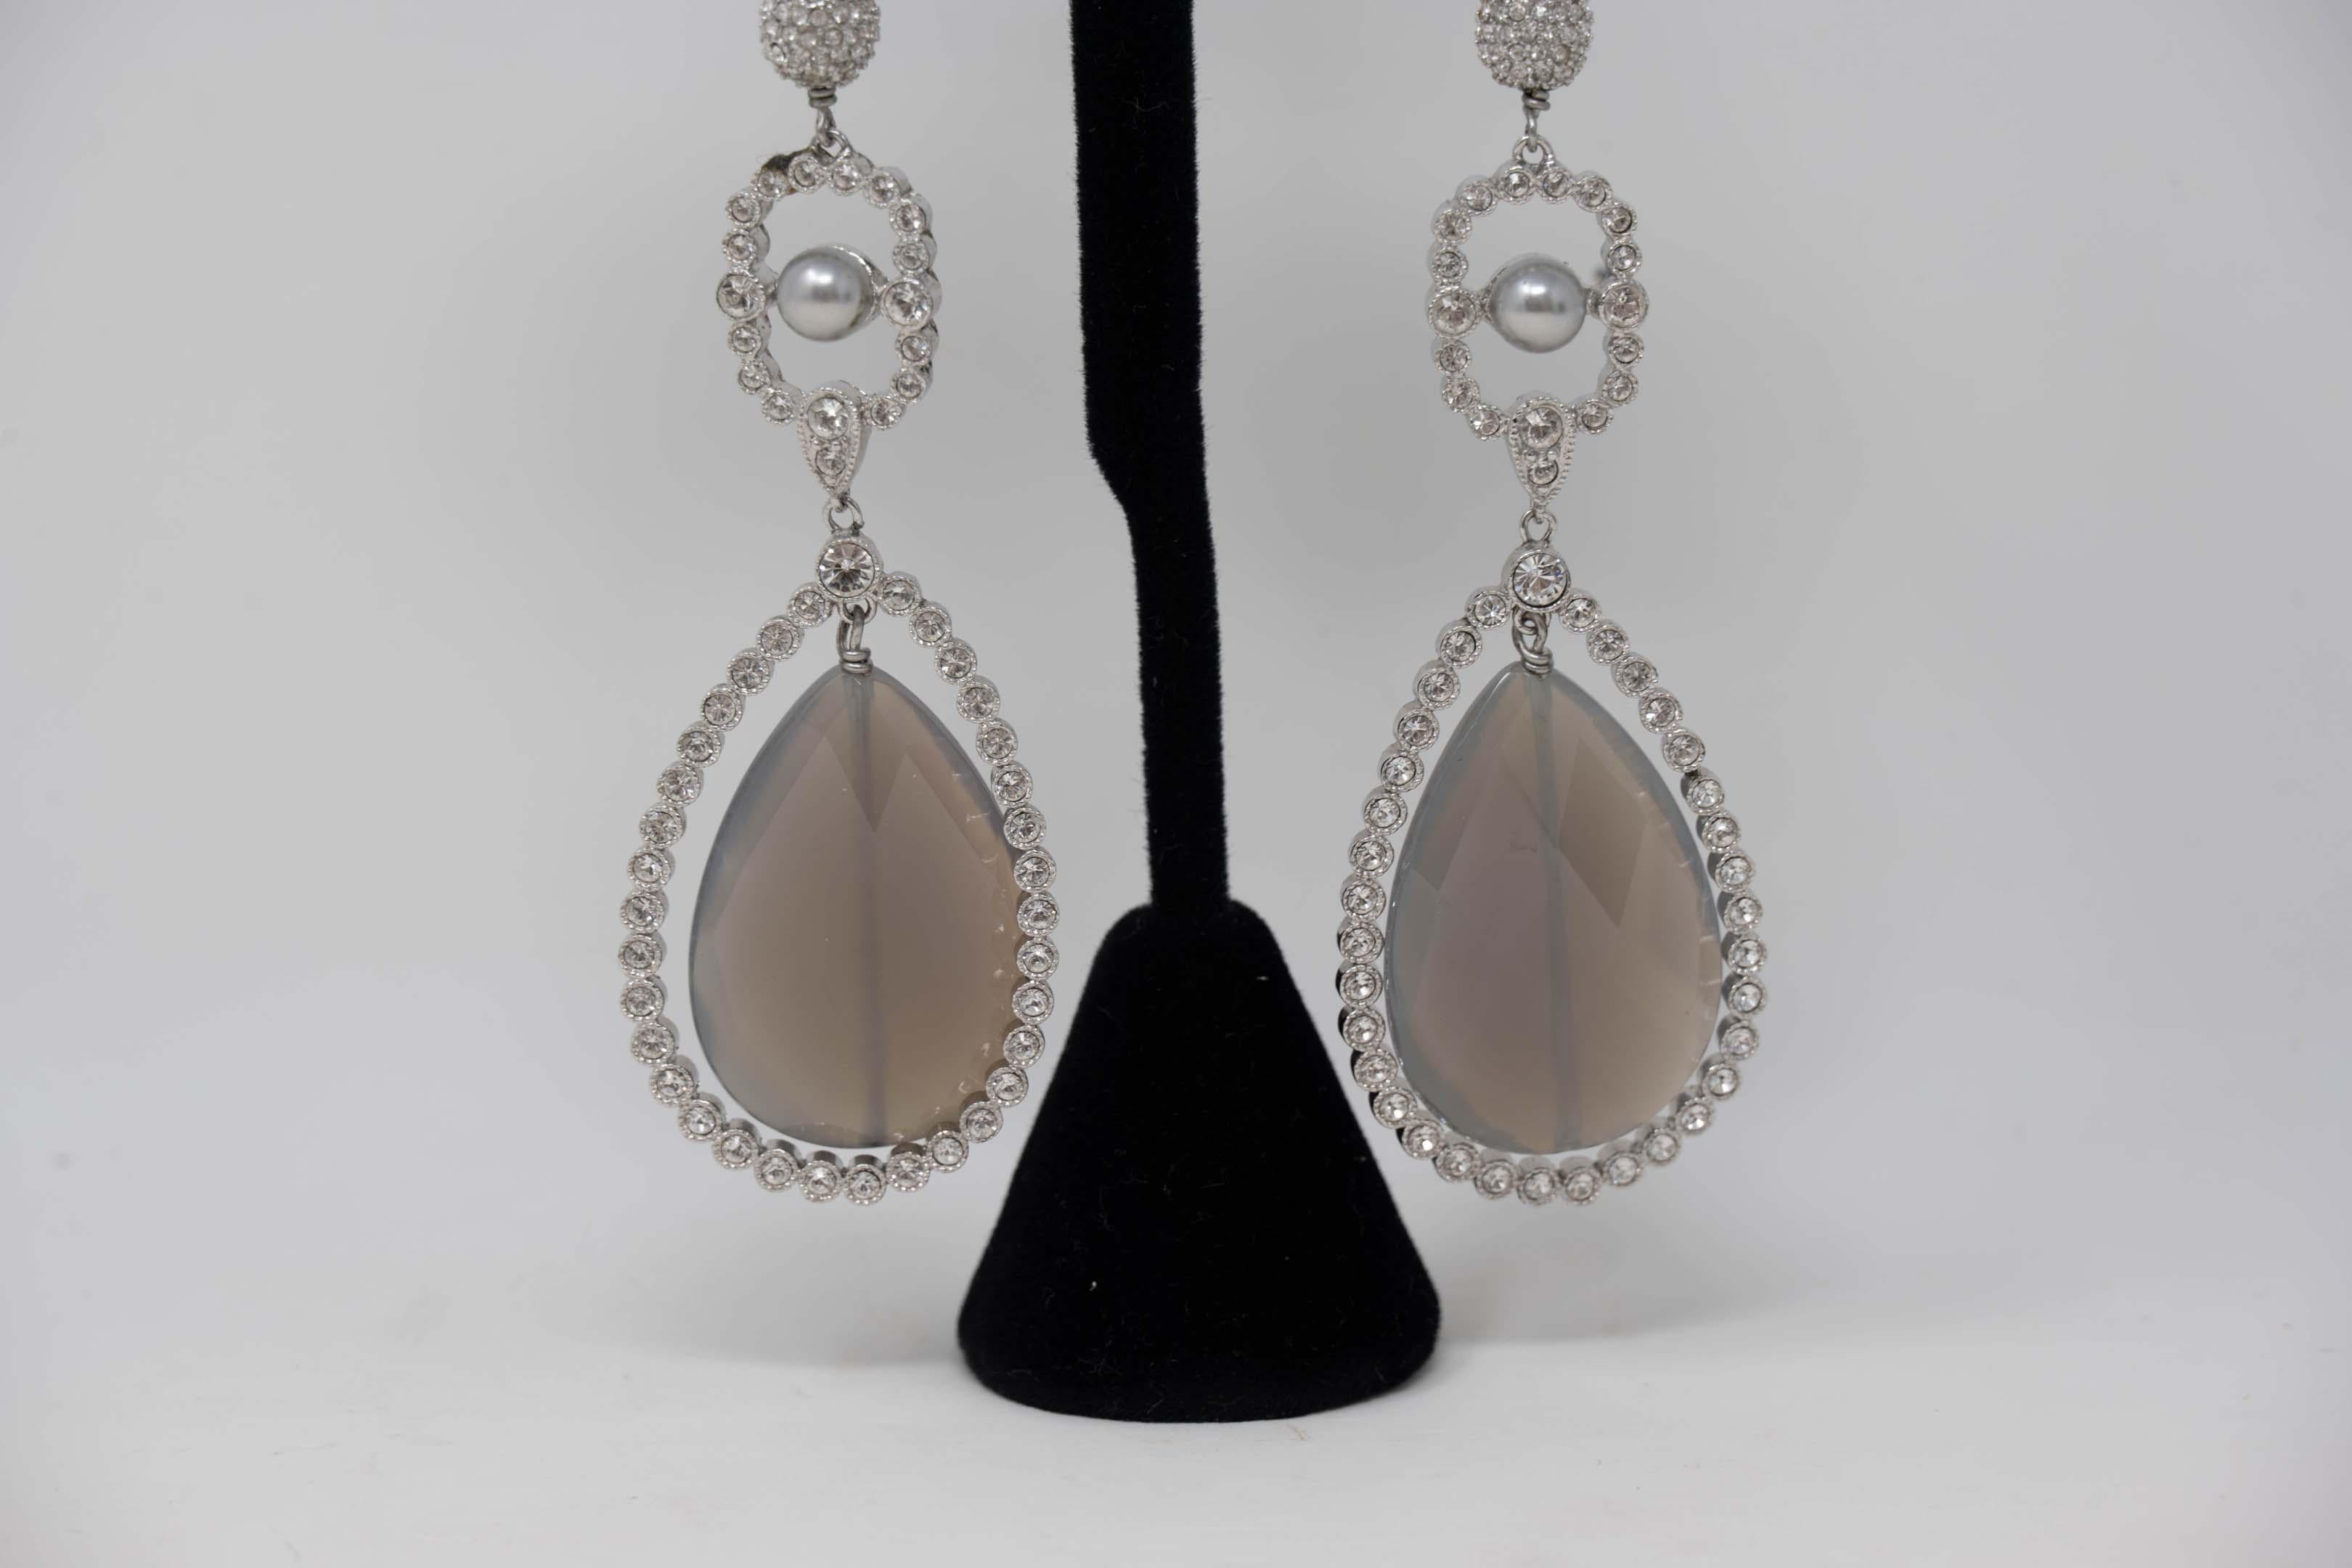 Christian Dior Rhinestones faux pearl and quartz clip-on earrings. Measures 4 inches long, stamped (Dior) on the clasp.
